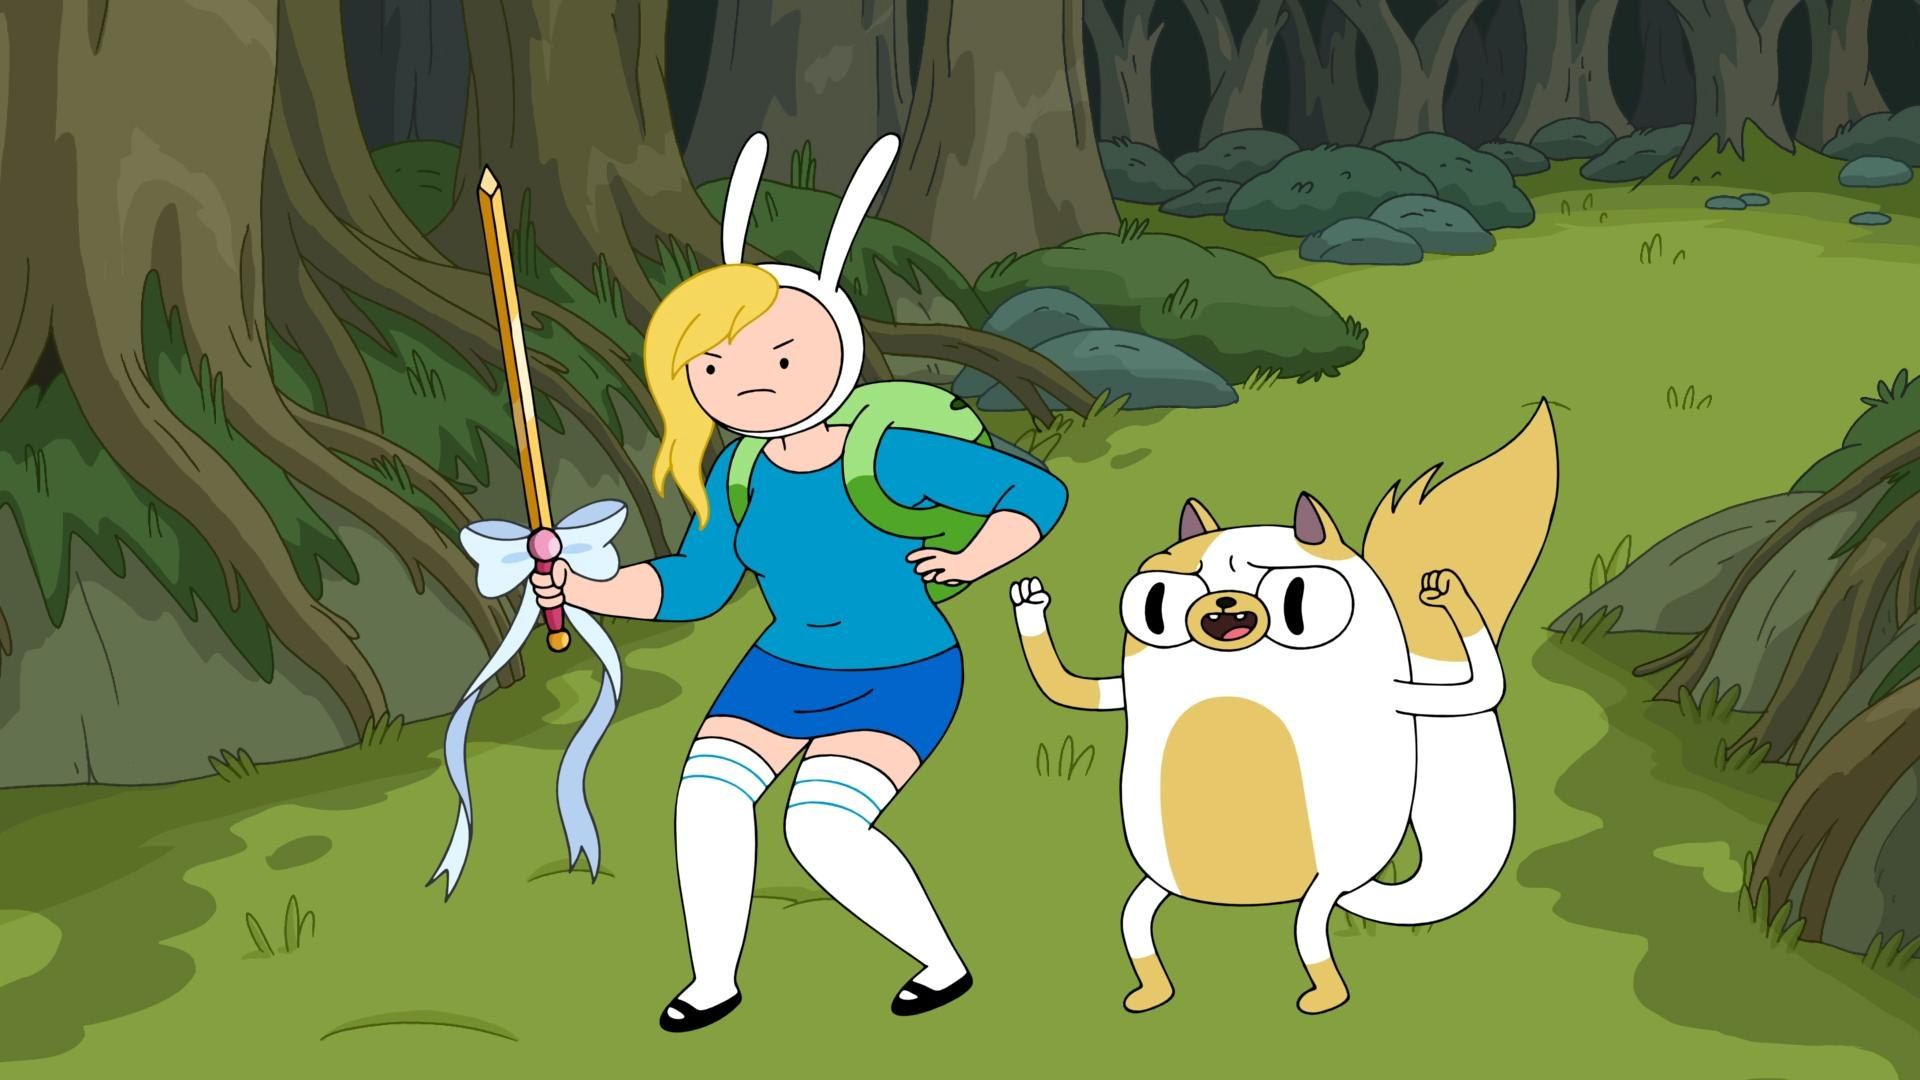 Hbo Max Announces 'Adventure Time: Fionna And Cake' Series